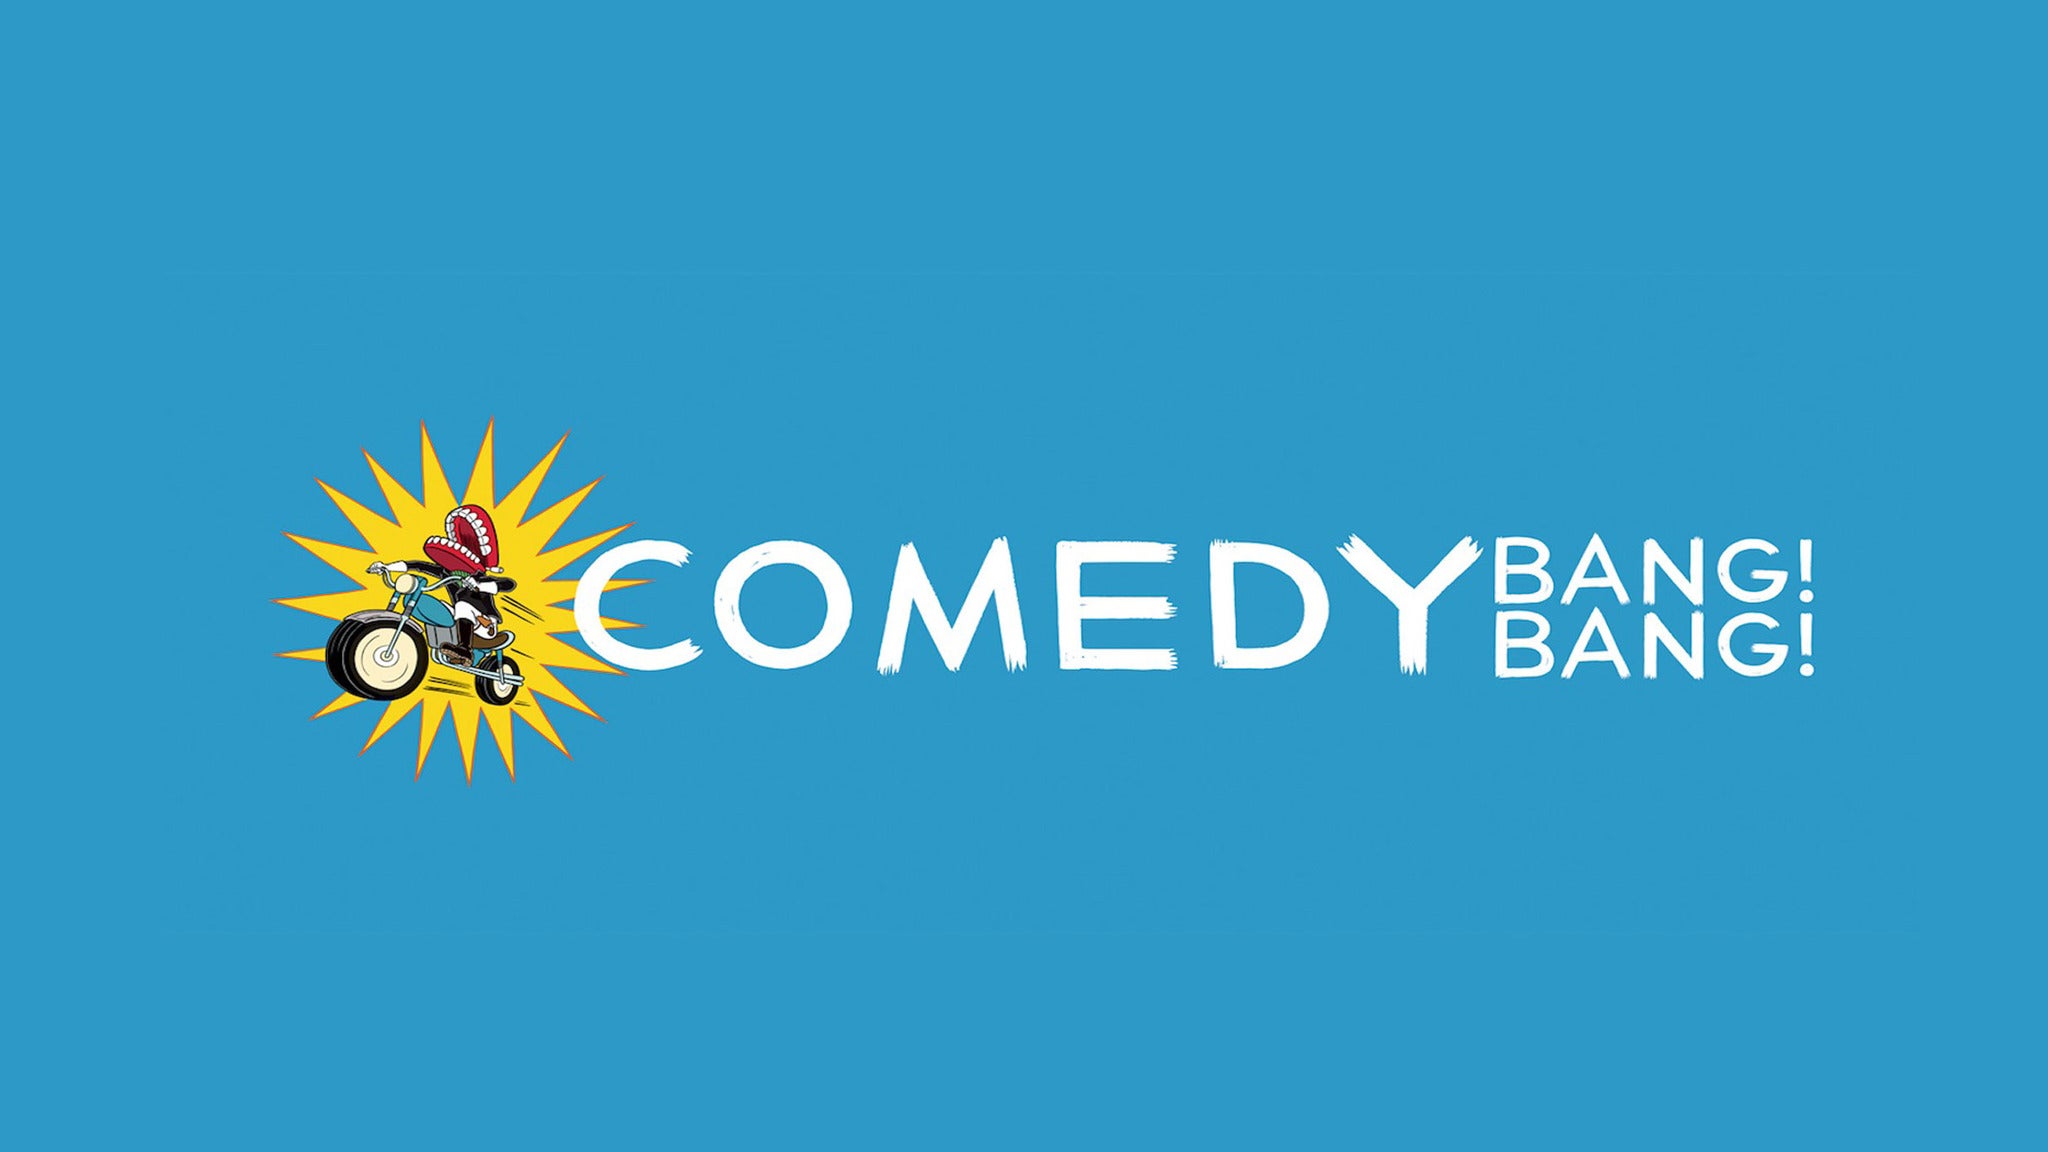 Comedy Bang! Bang! Live! Starring Scott Aukerman w/ guests in Washington promo photo for Live Nation presale offer code